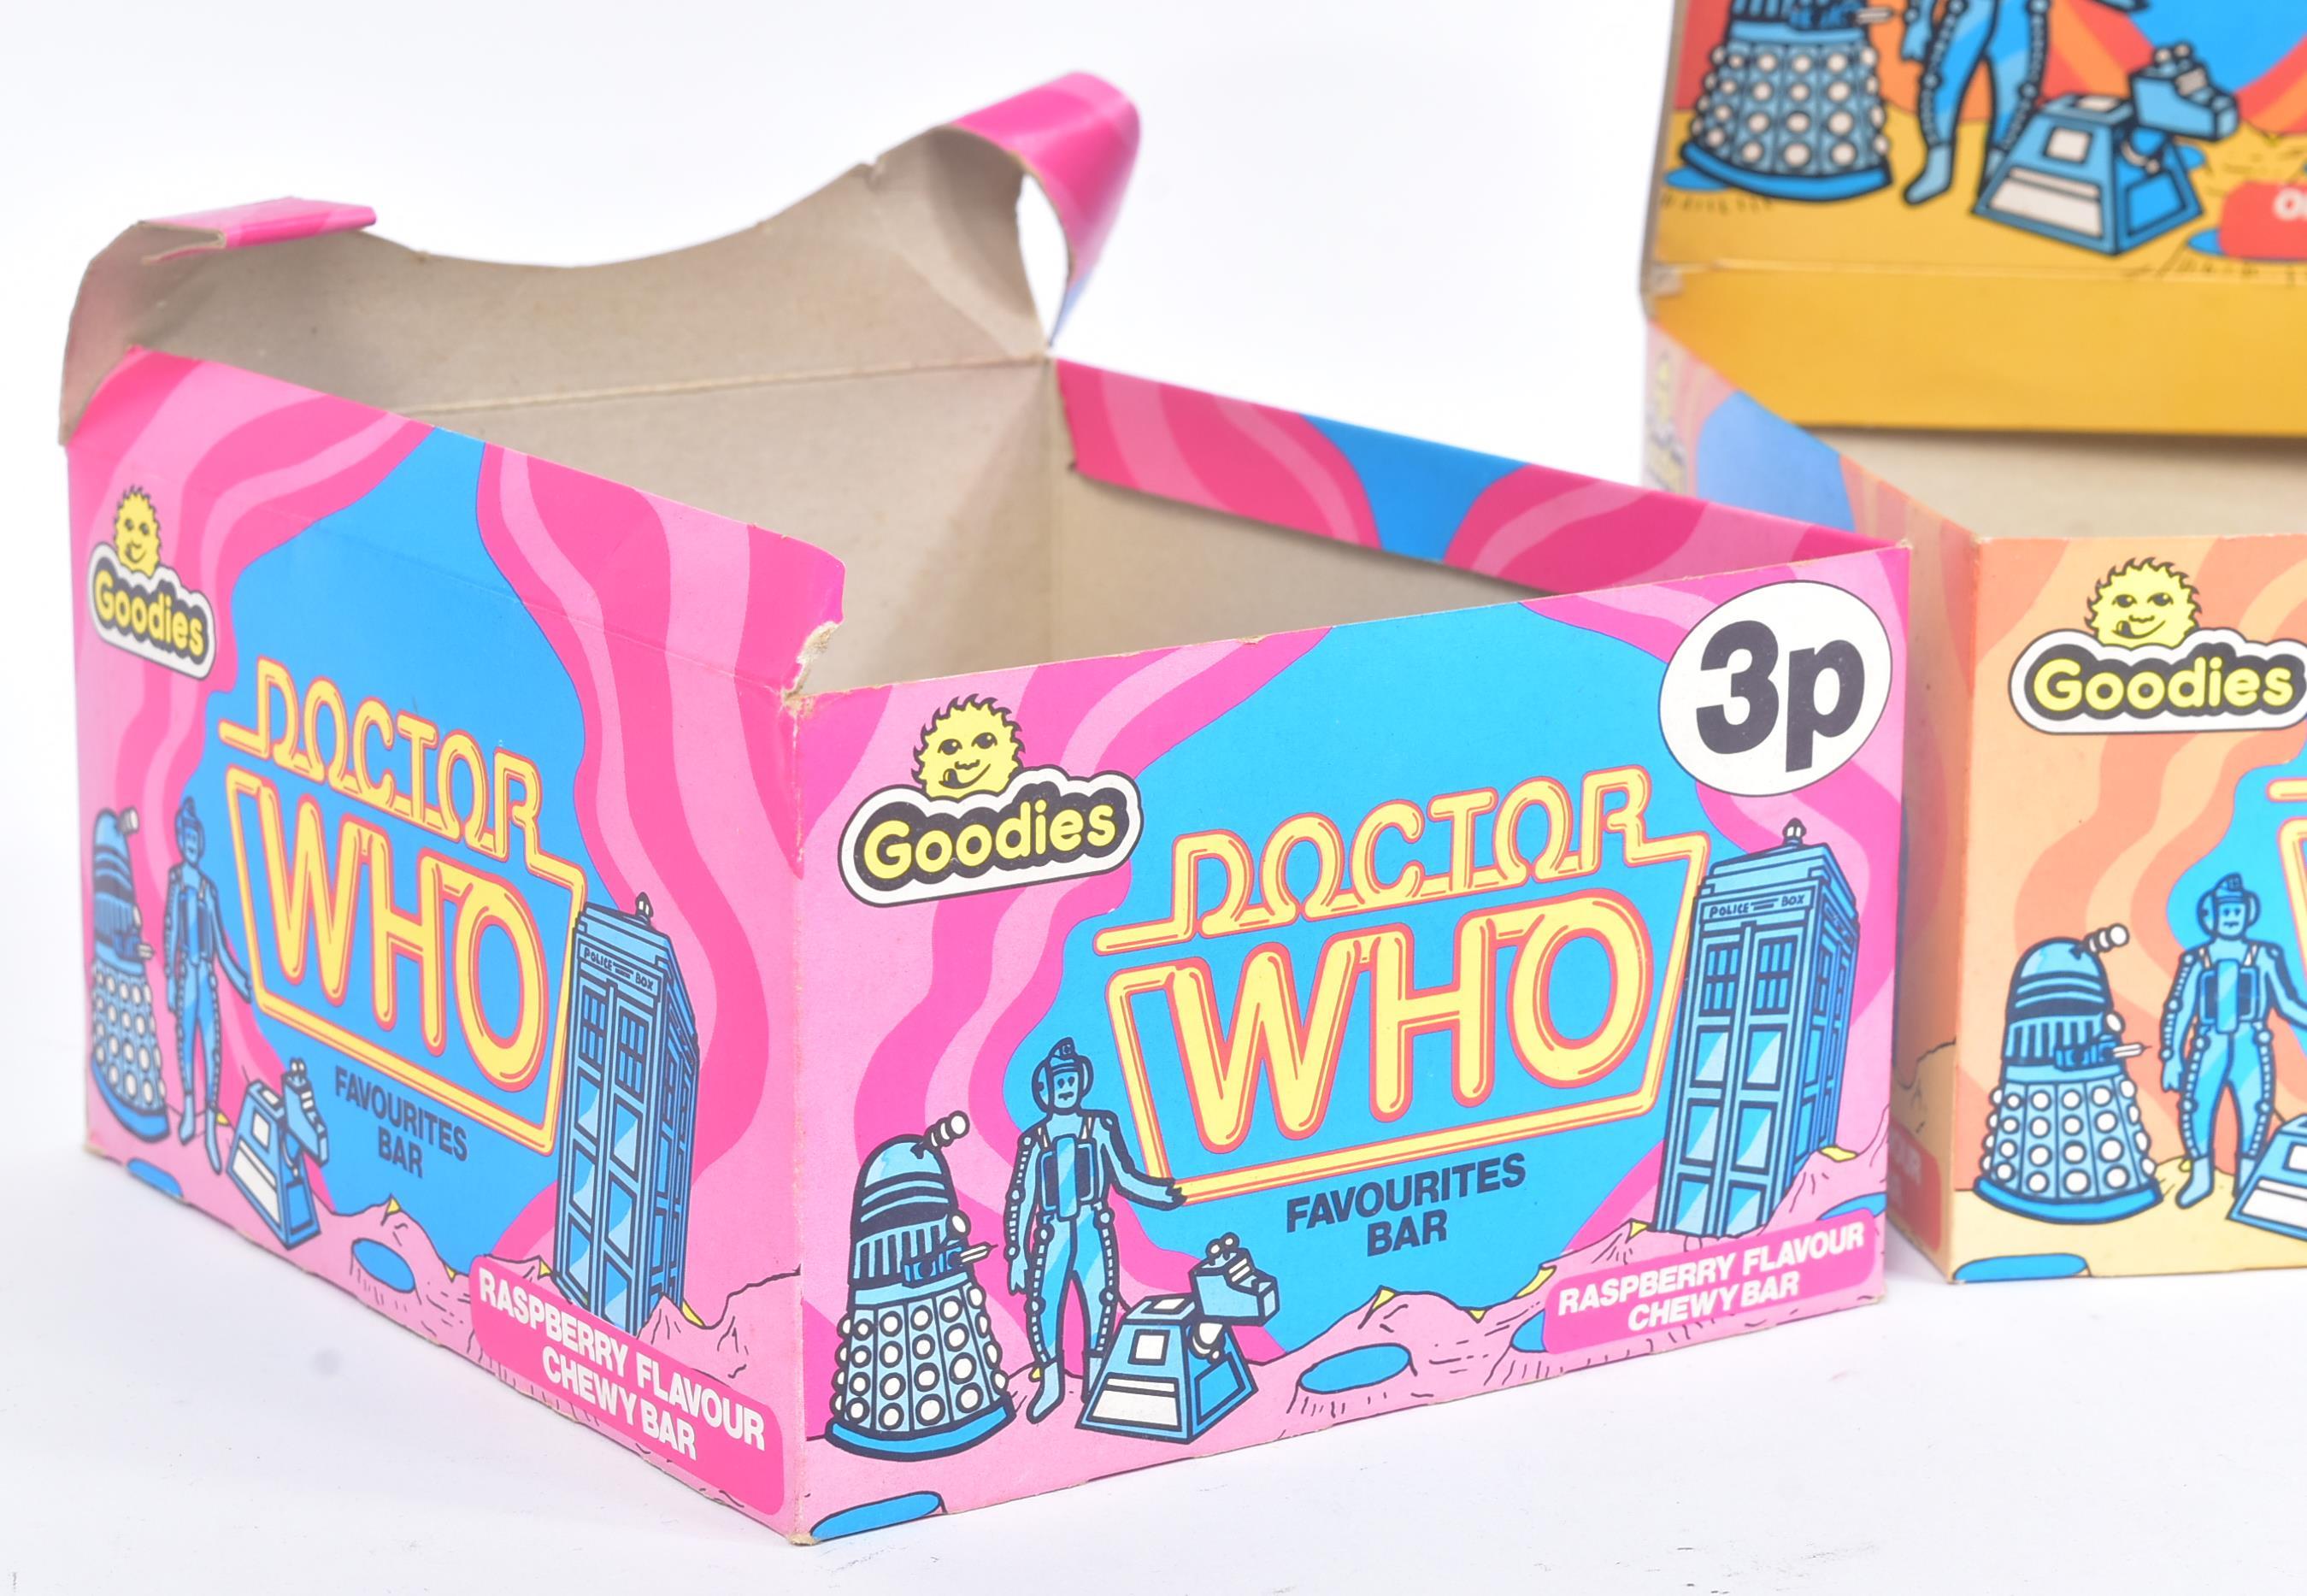 DOCTOR WHO - GOODIES CHEWY BAR - ORIGINAL BOXES - Image 4 of 4